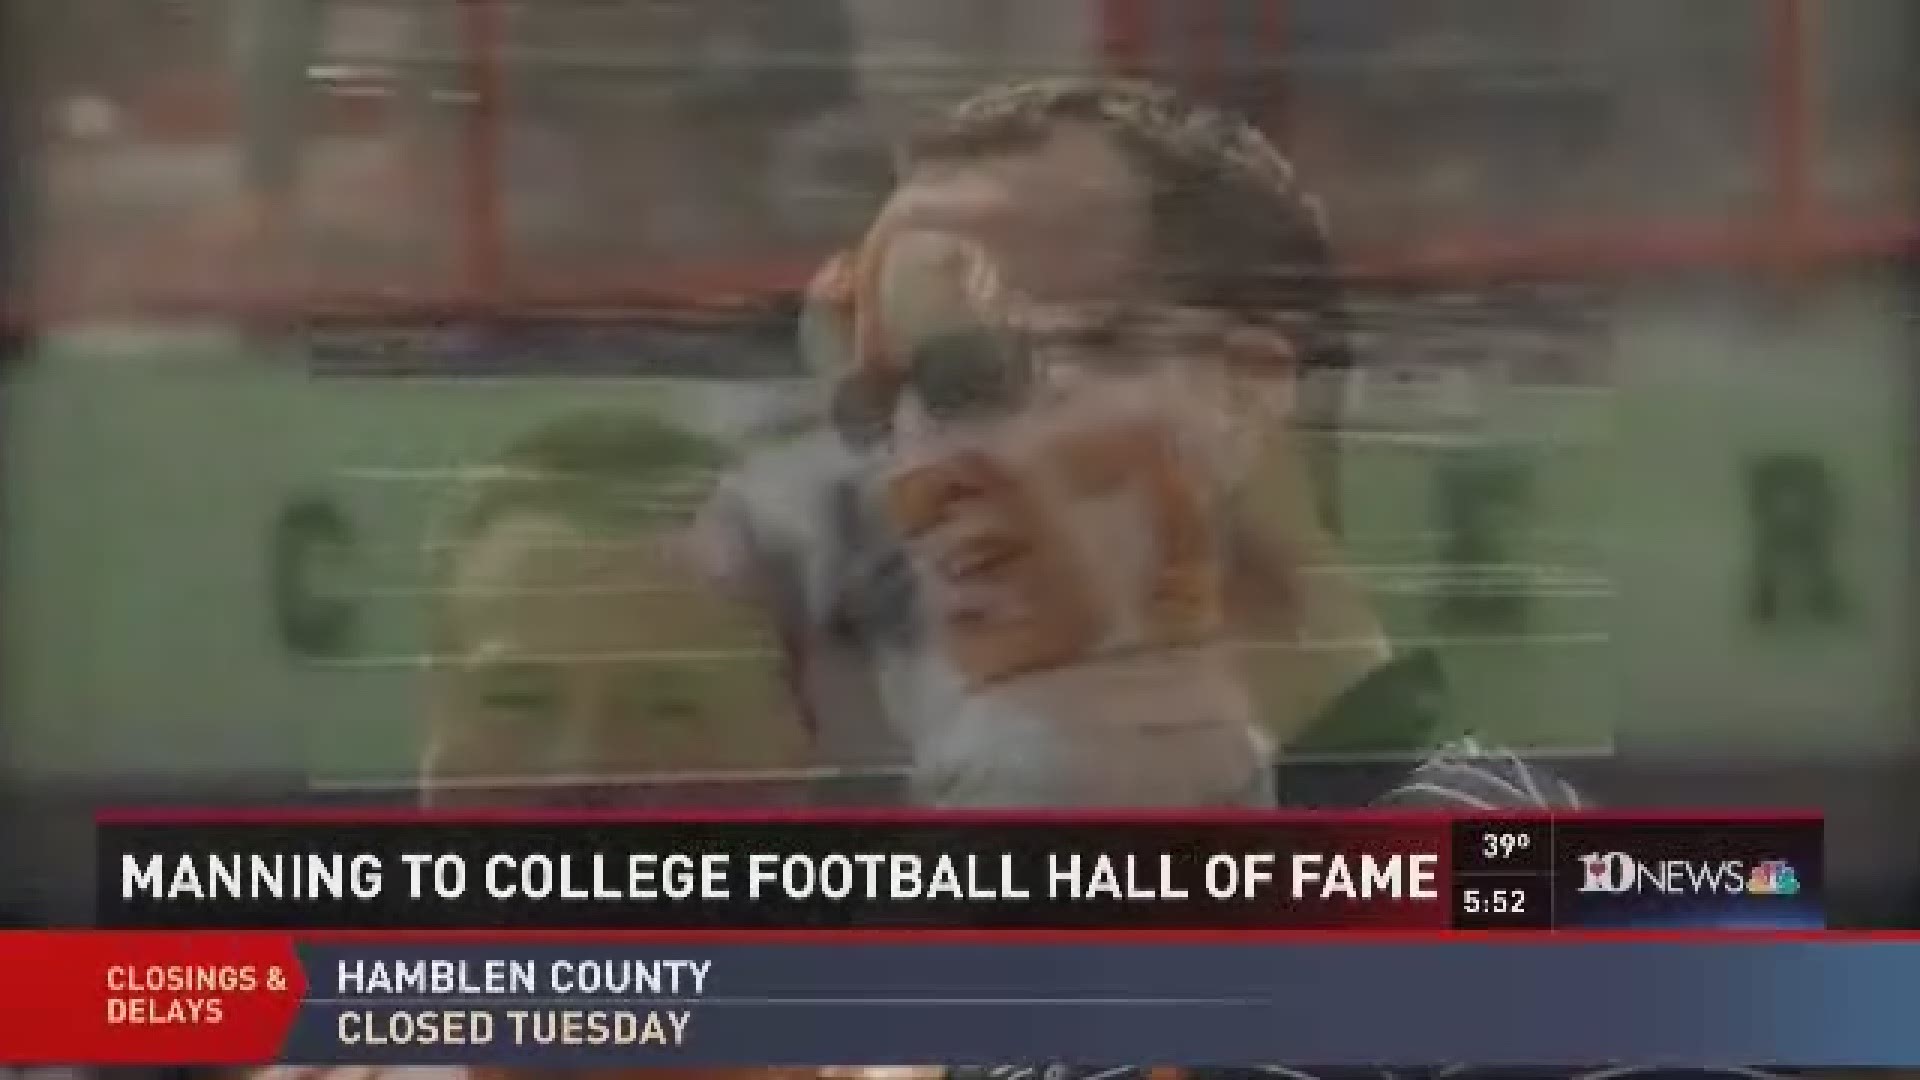 Peyton Manning will be inducted into 2017 College Football Hall of Fame.